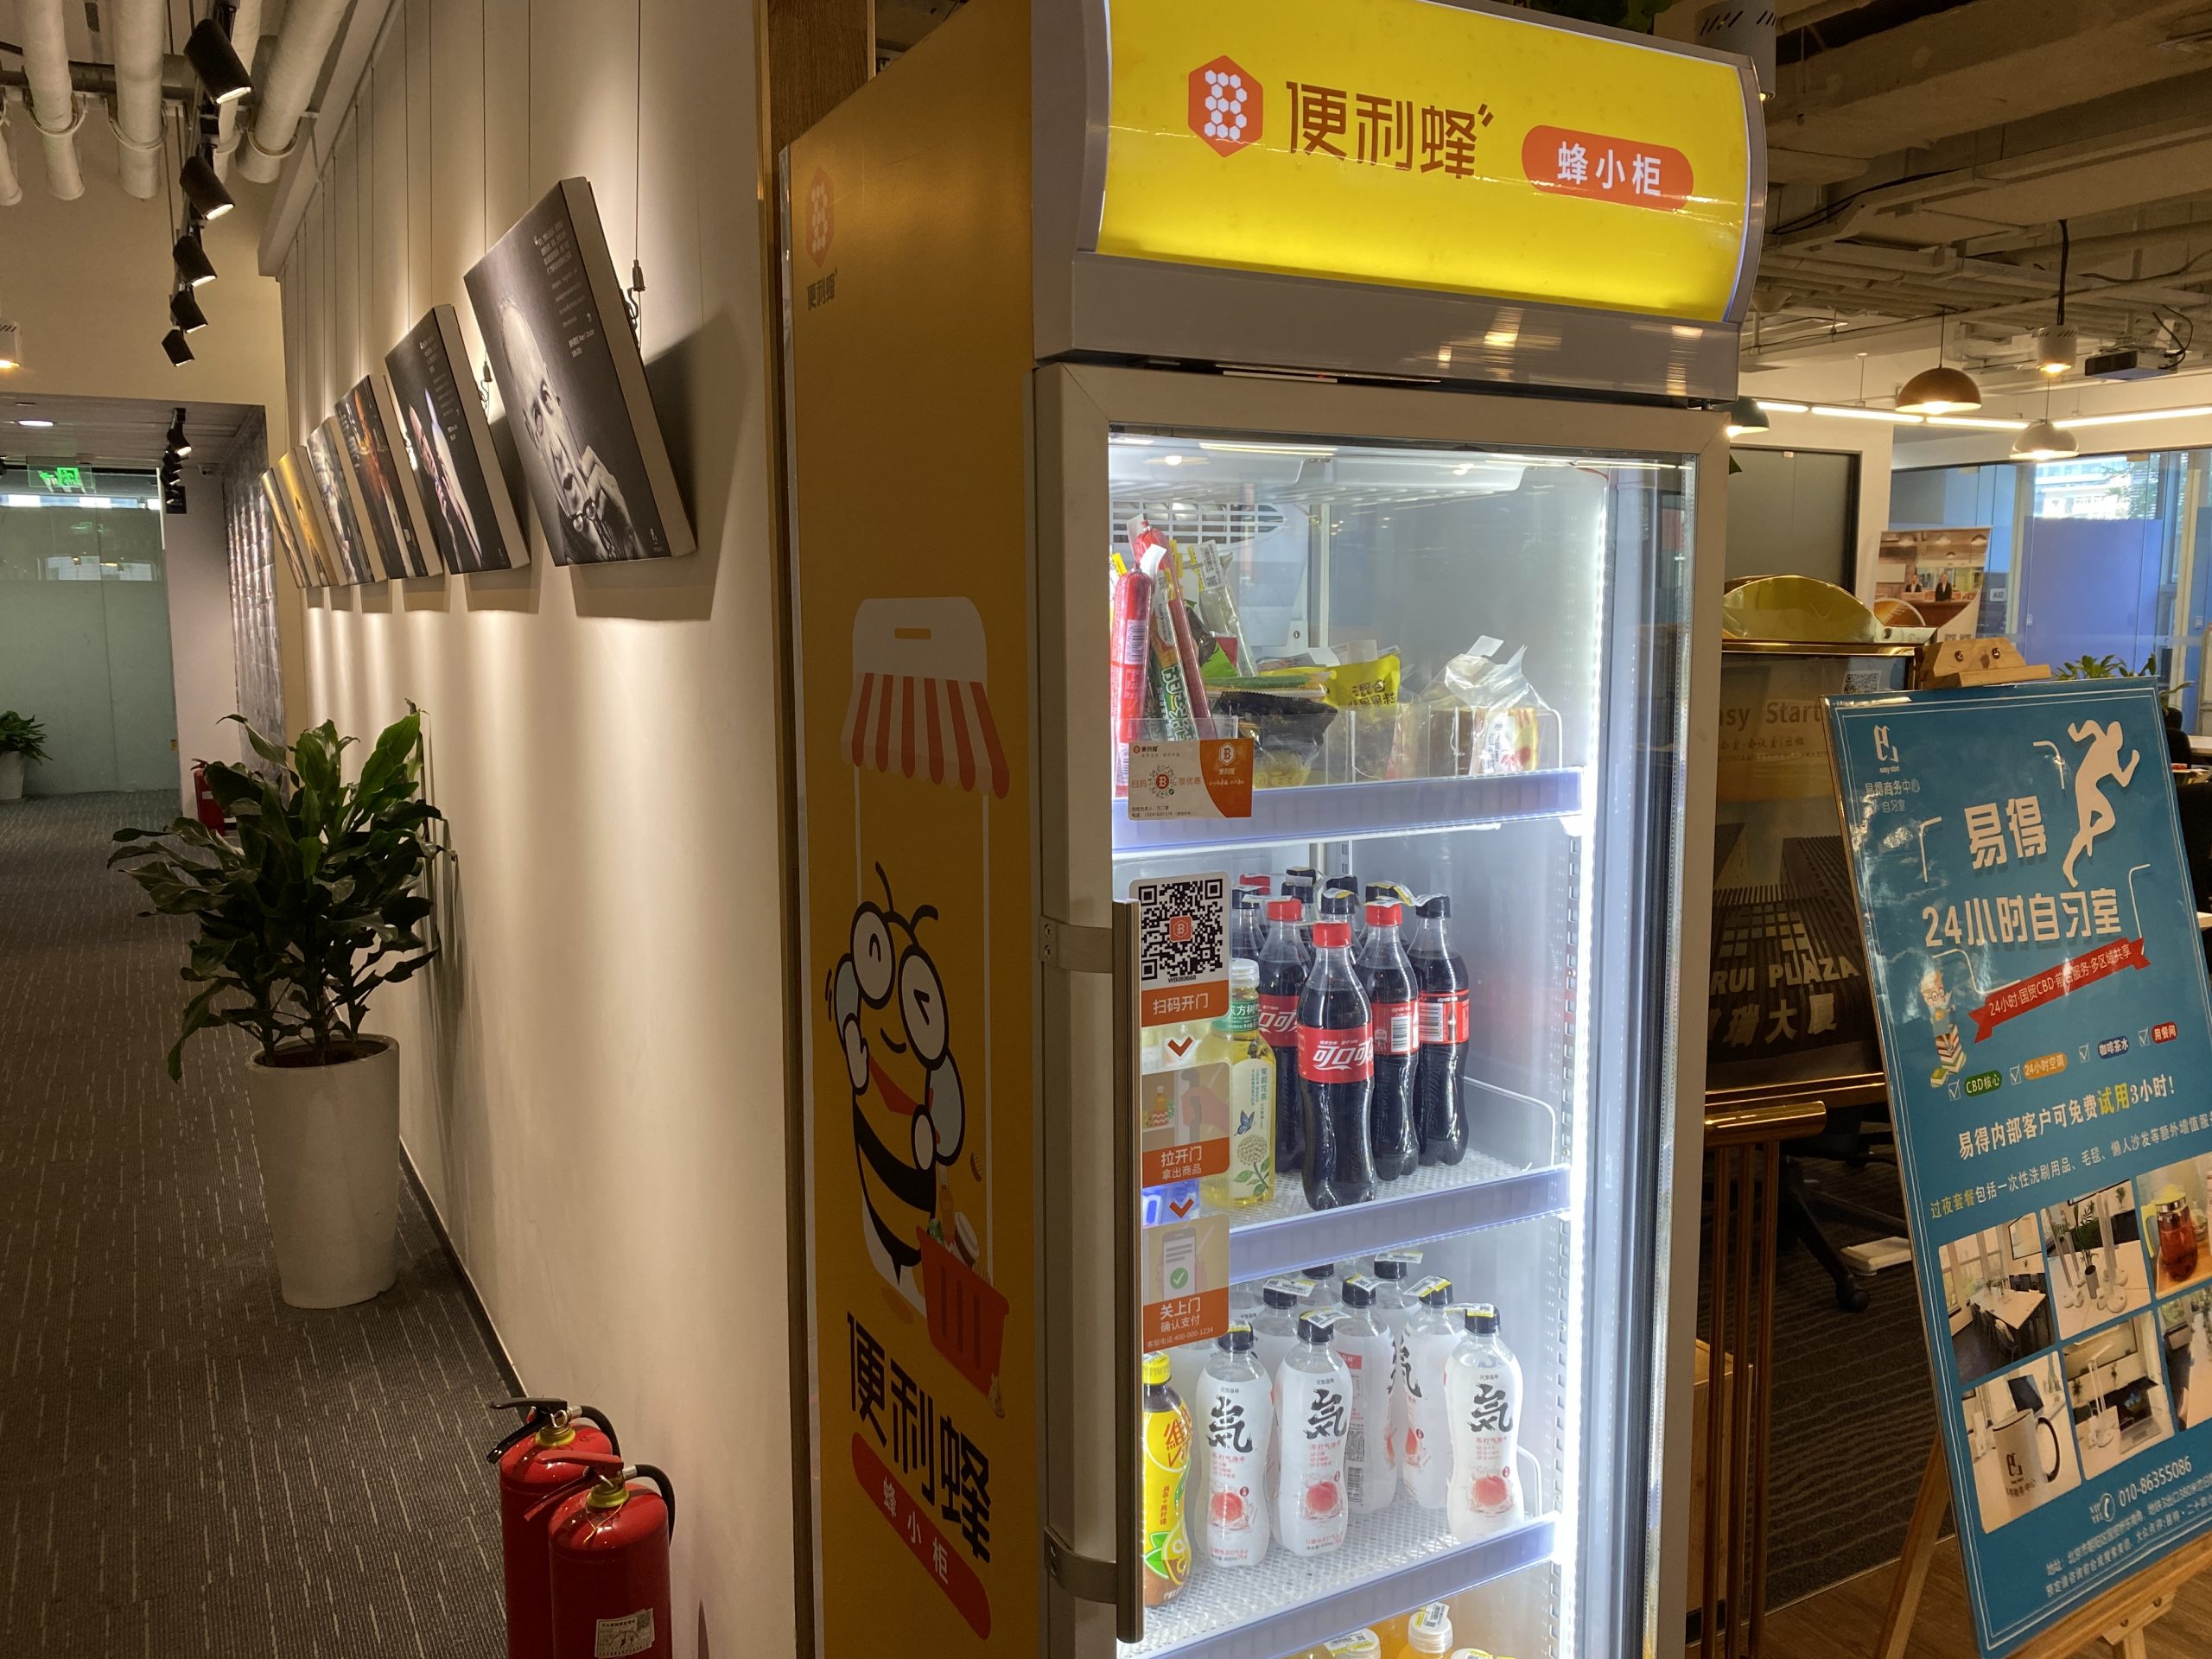 Cashier-less convenience store Bianlifeng likely profitable in 2020, against industry trends